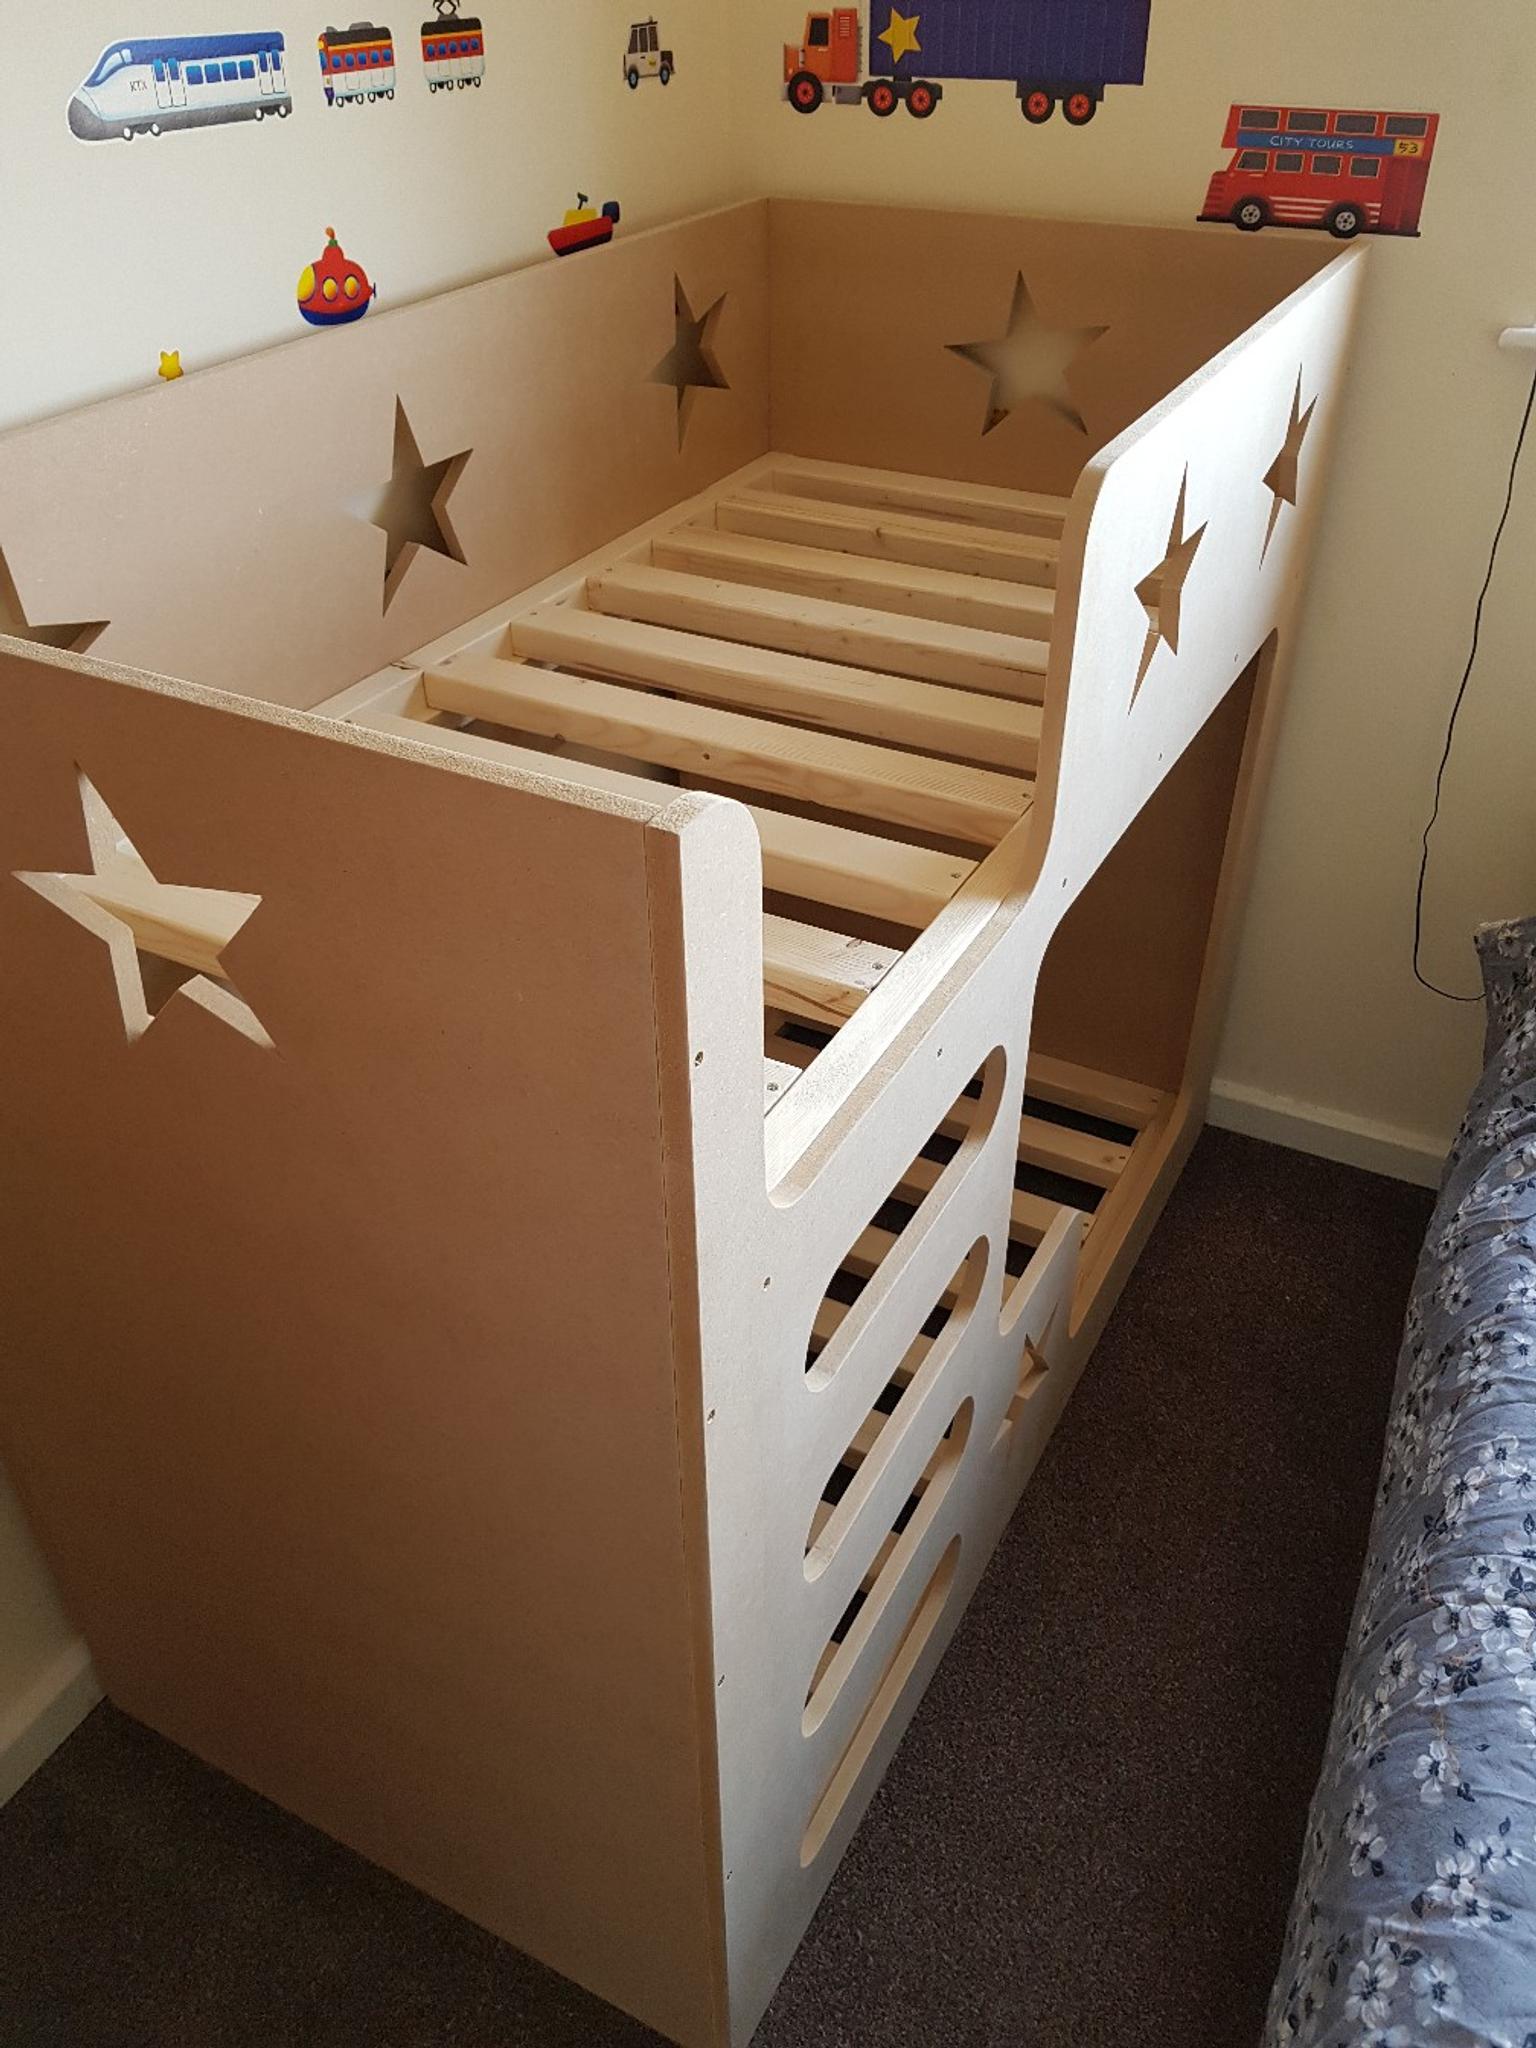 Toddler Bunk Bed In B31 Birmingham For, Toddler Size Bunk Beds